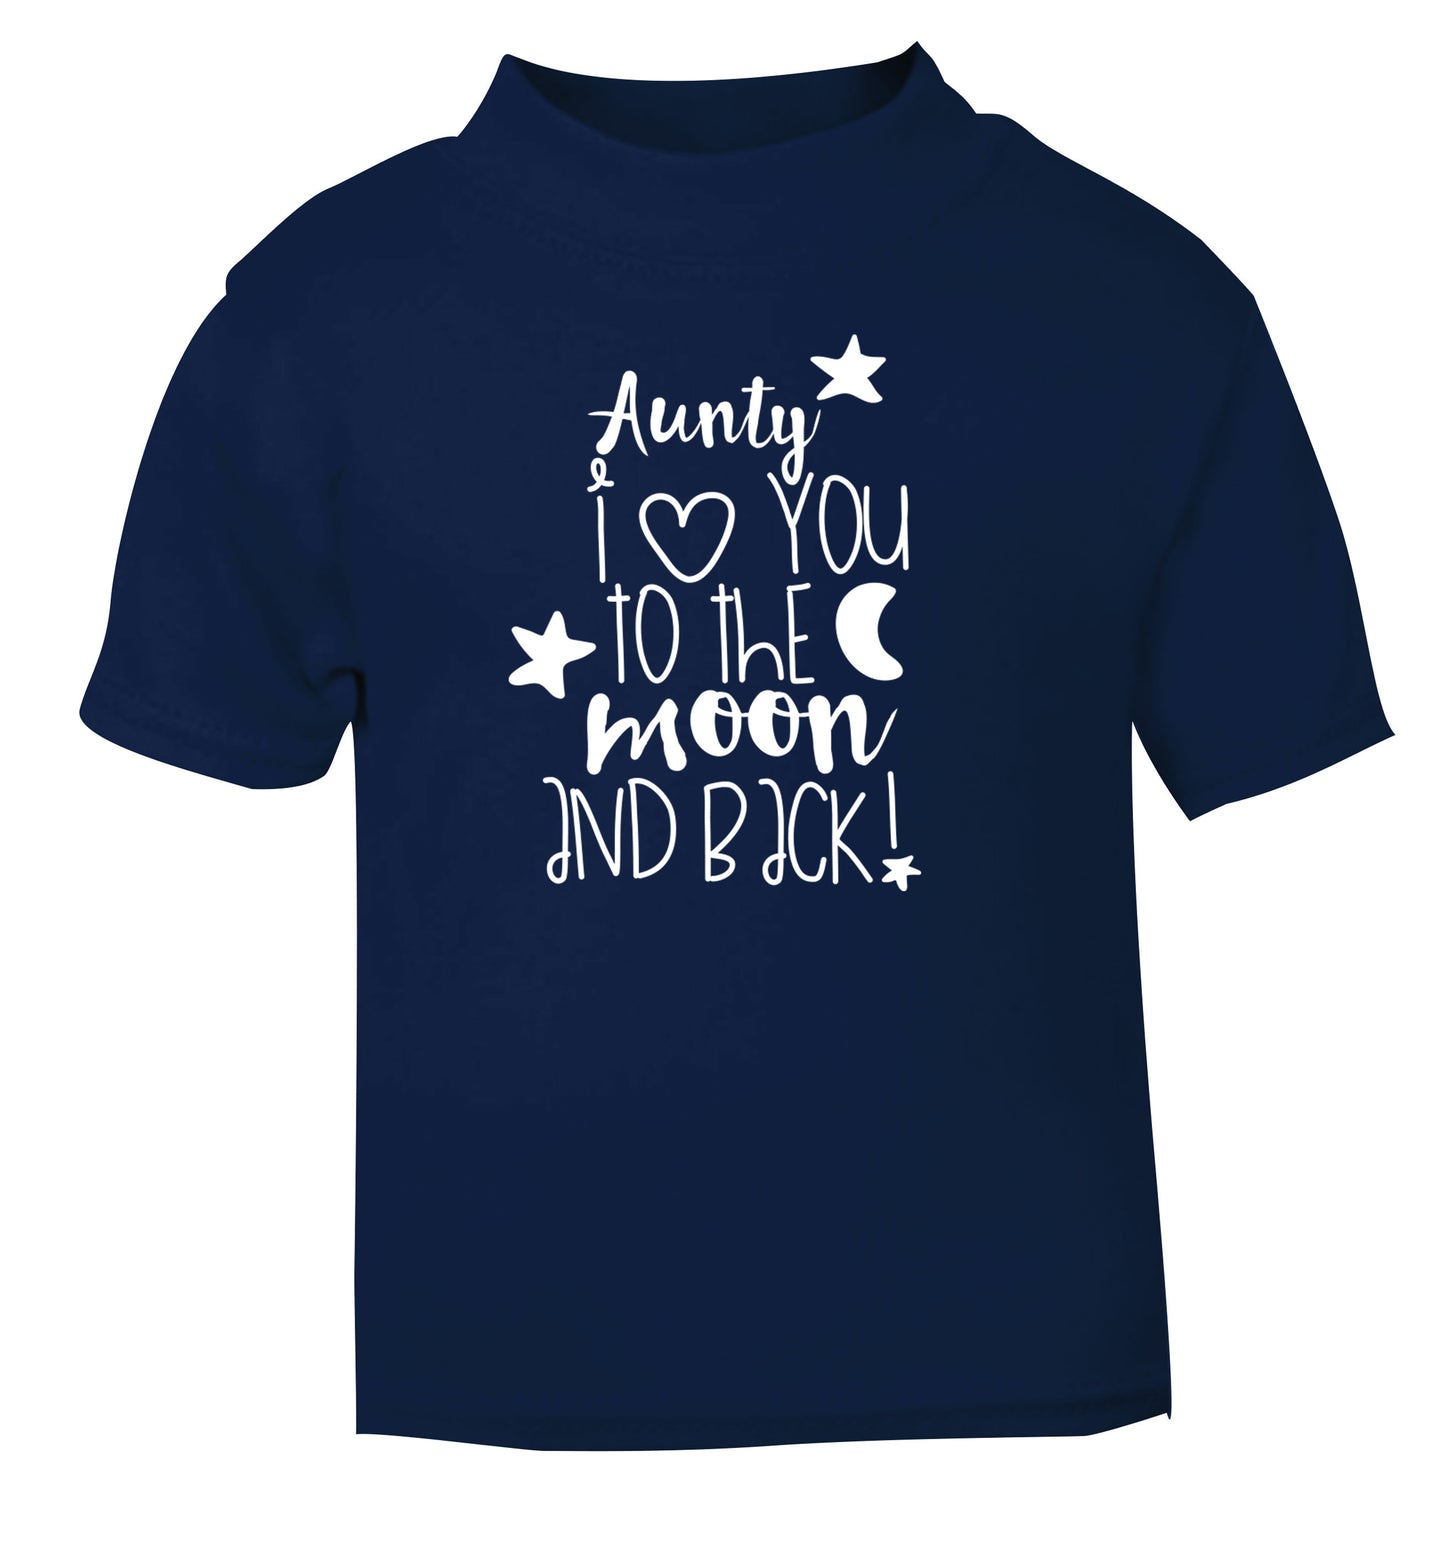 Aunty I love you to the moon and back navy Baby Toddler Tshirt 2 Years